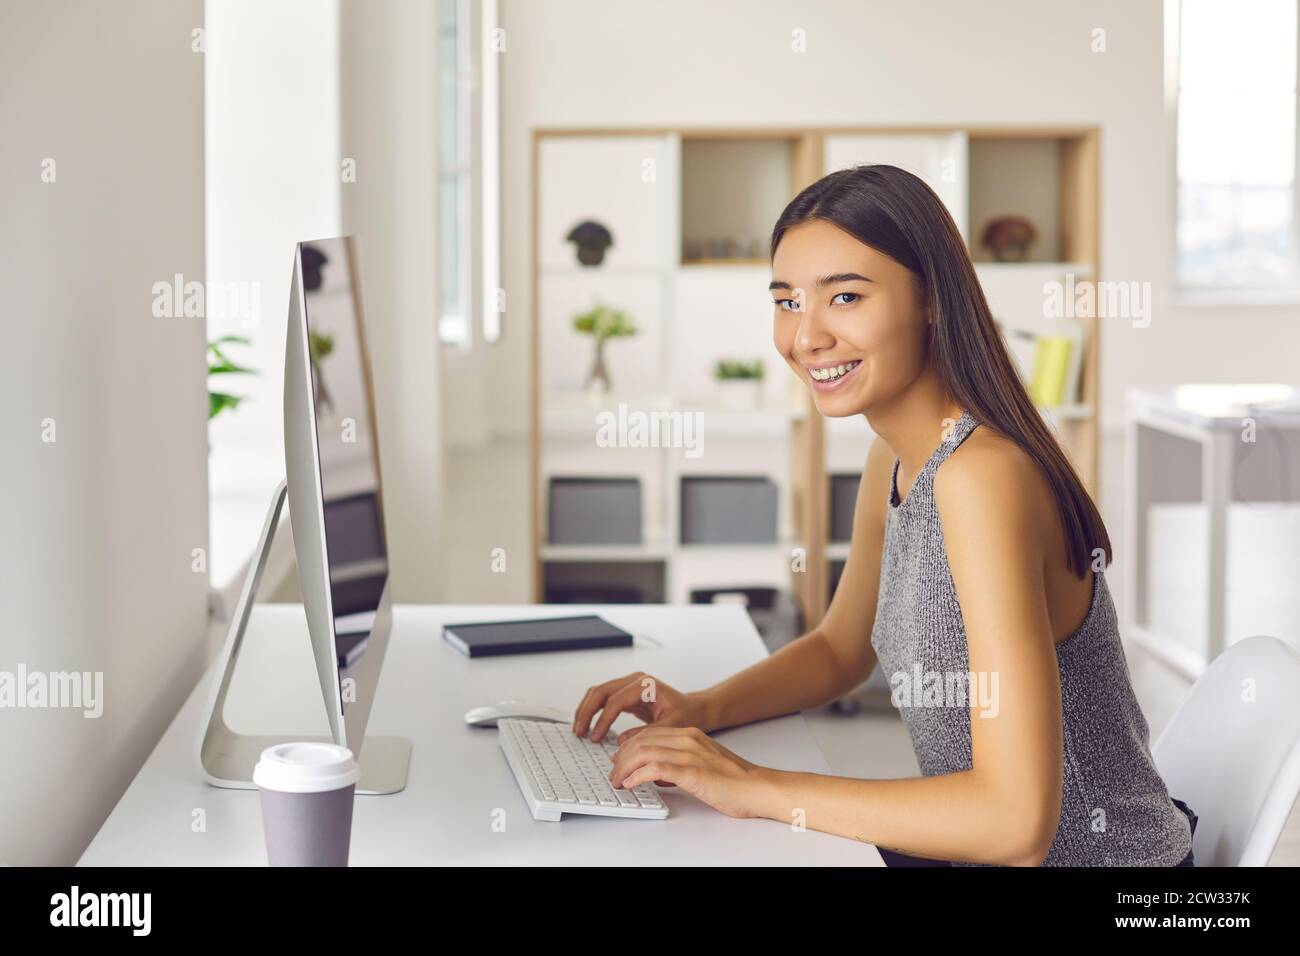 Young woman smiling and looking at camera while sitting at desk and working on computer Stock Photo